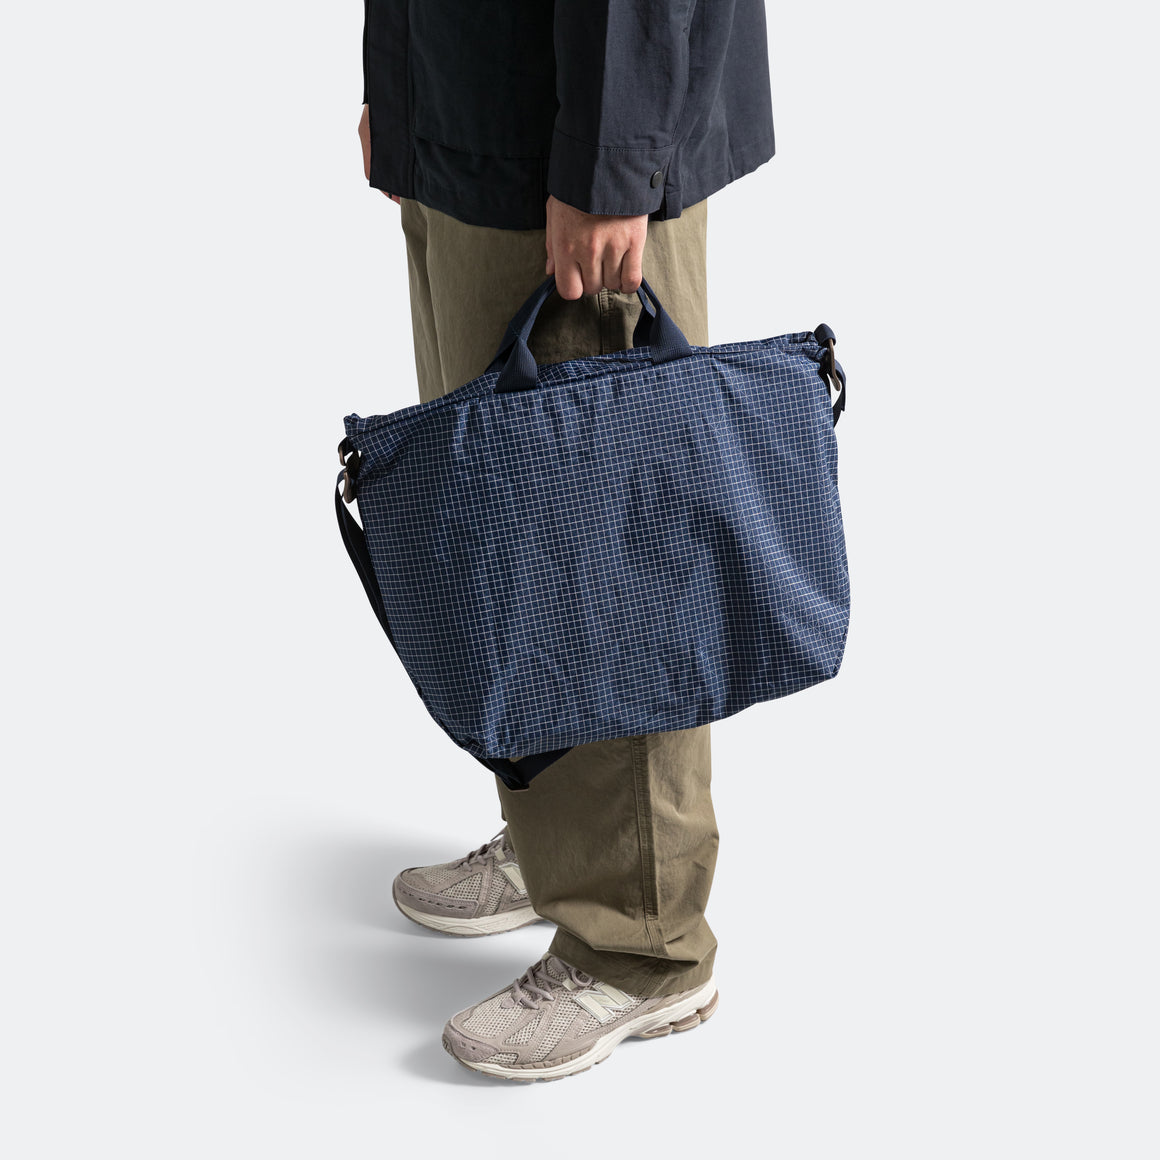 Adsum - Zip Tote - Navy Grid - UP THERE